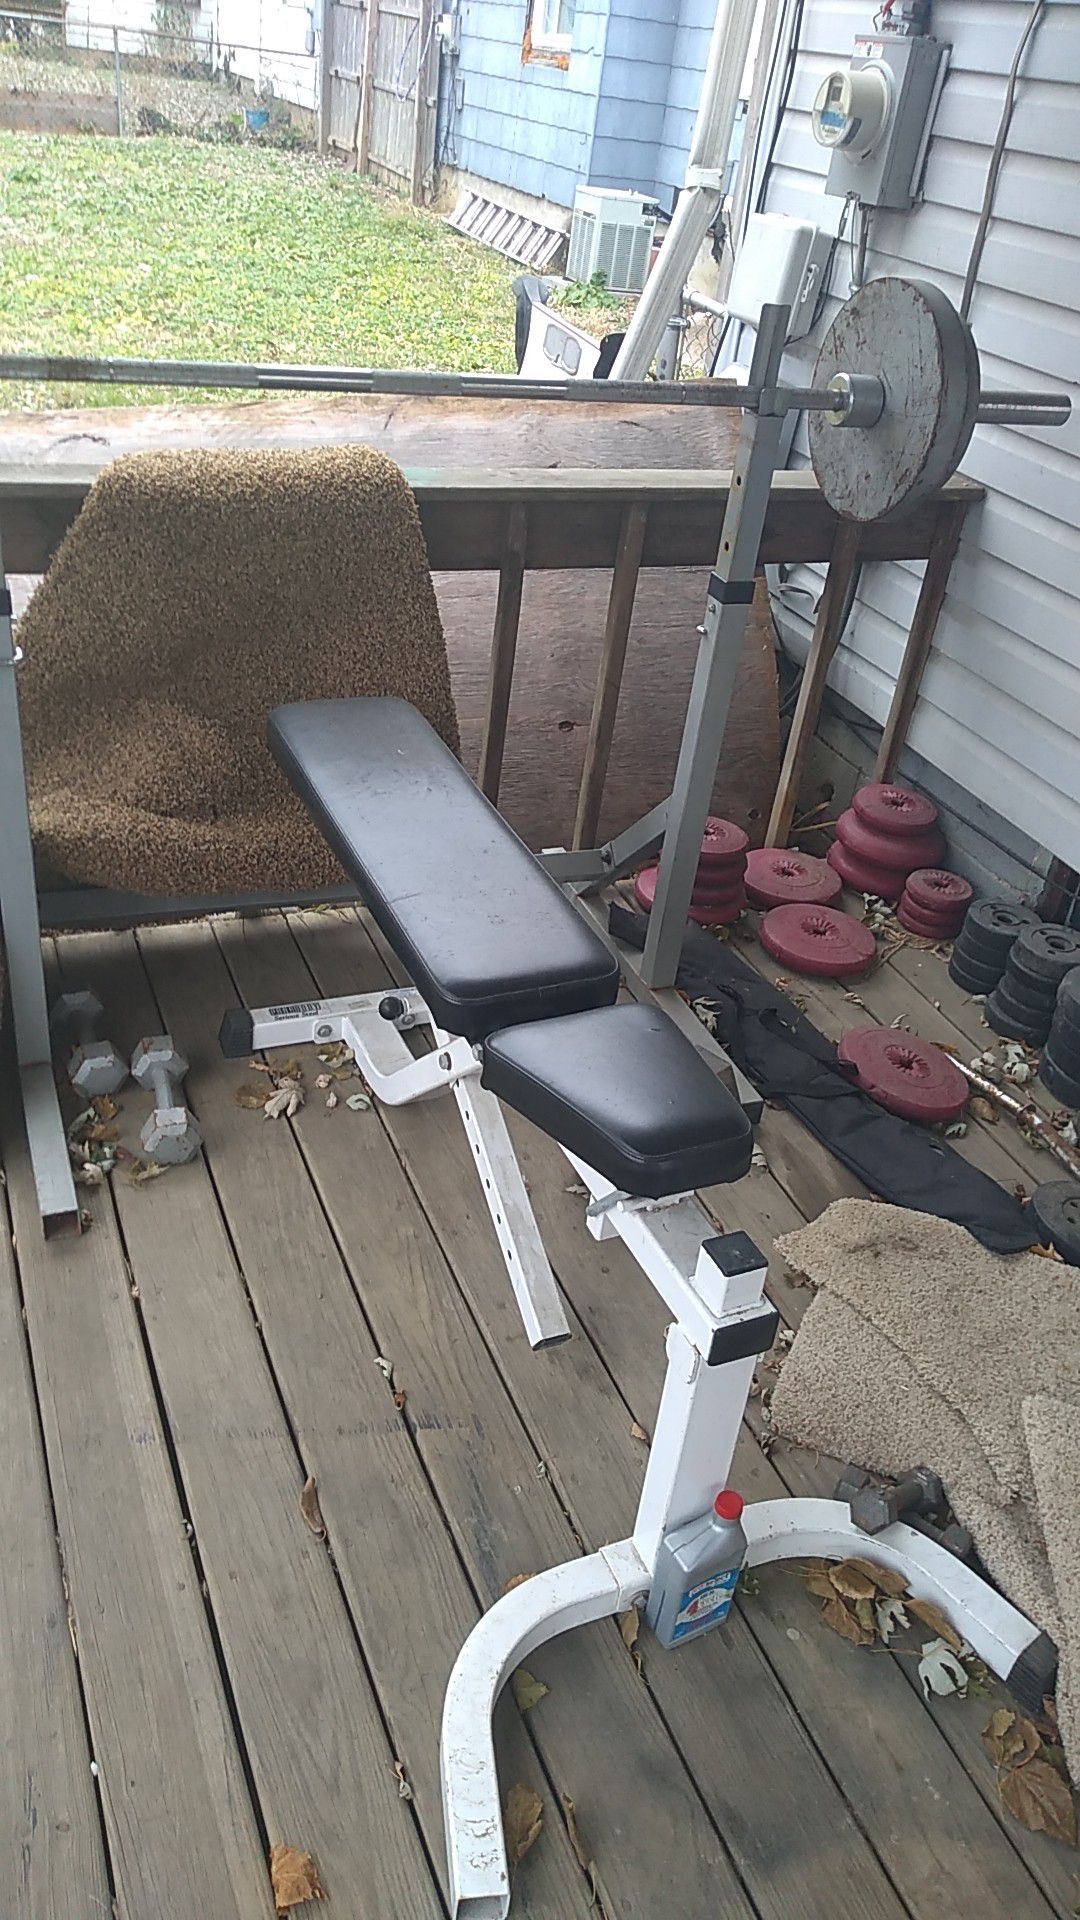 Bench weights everything